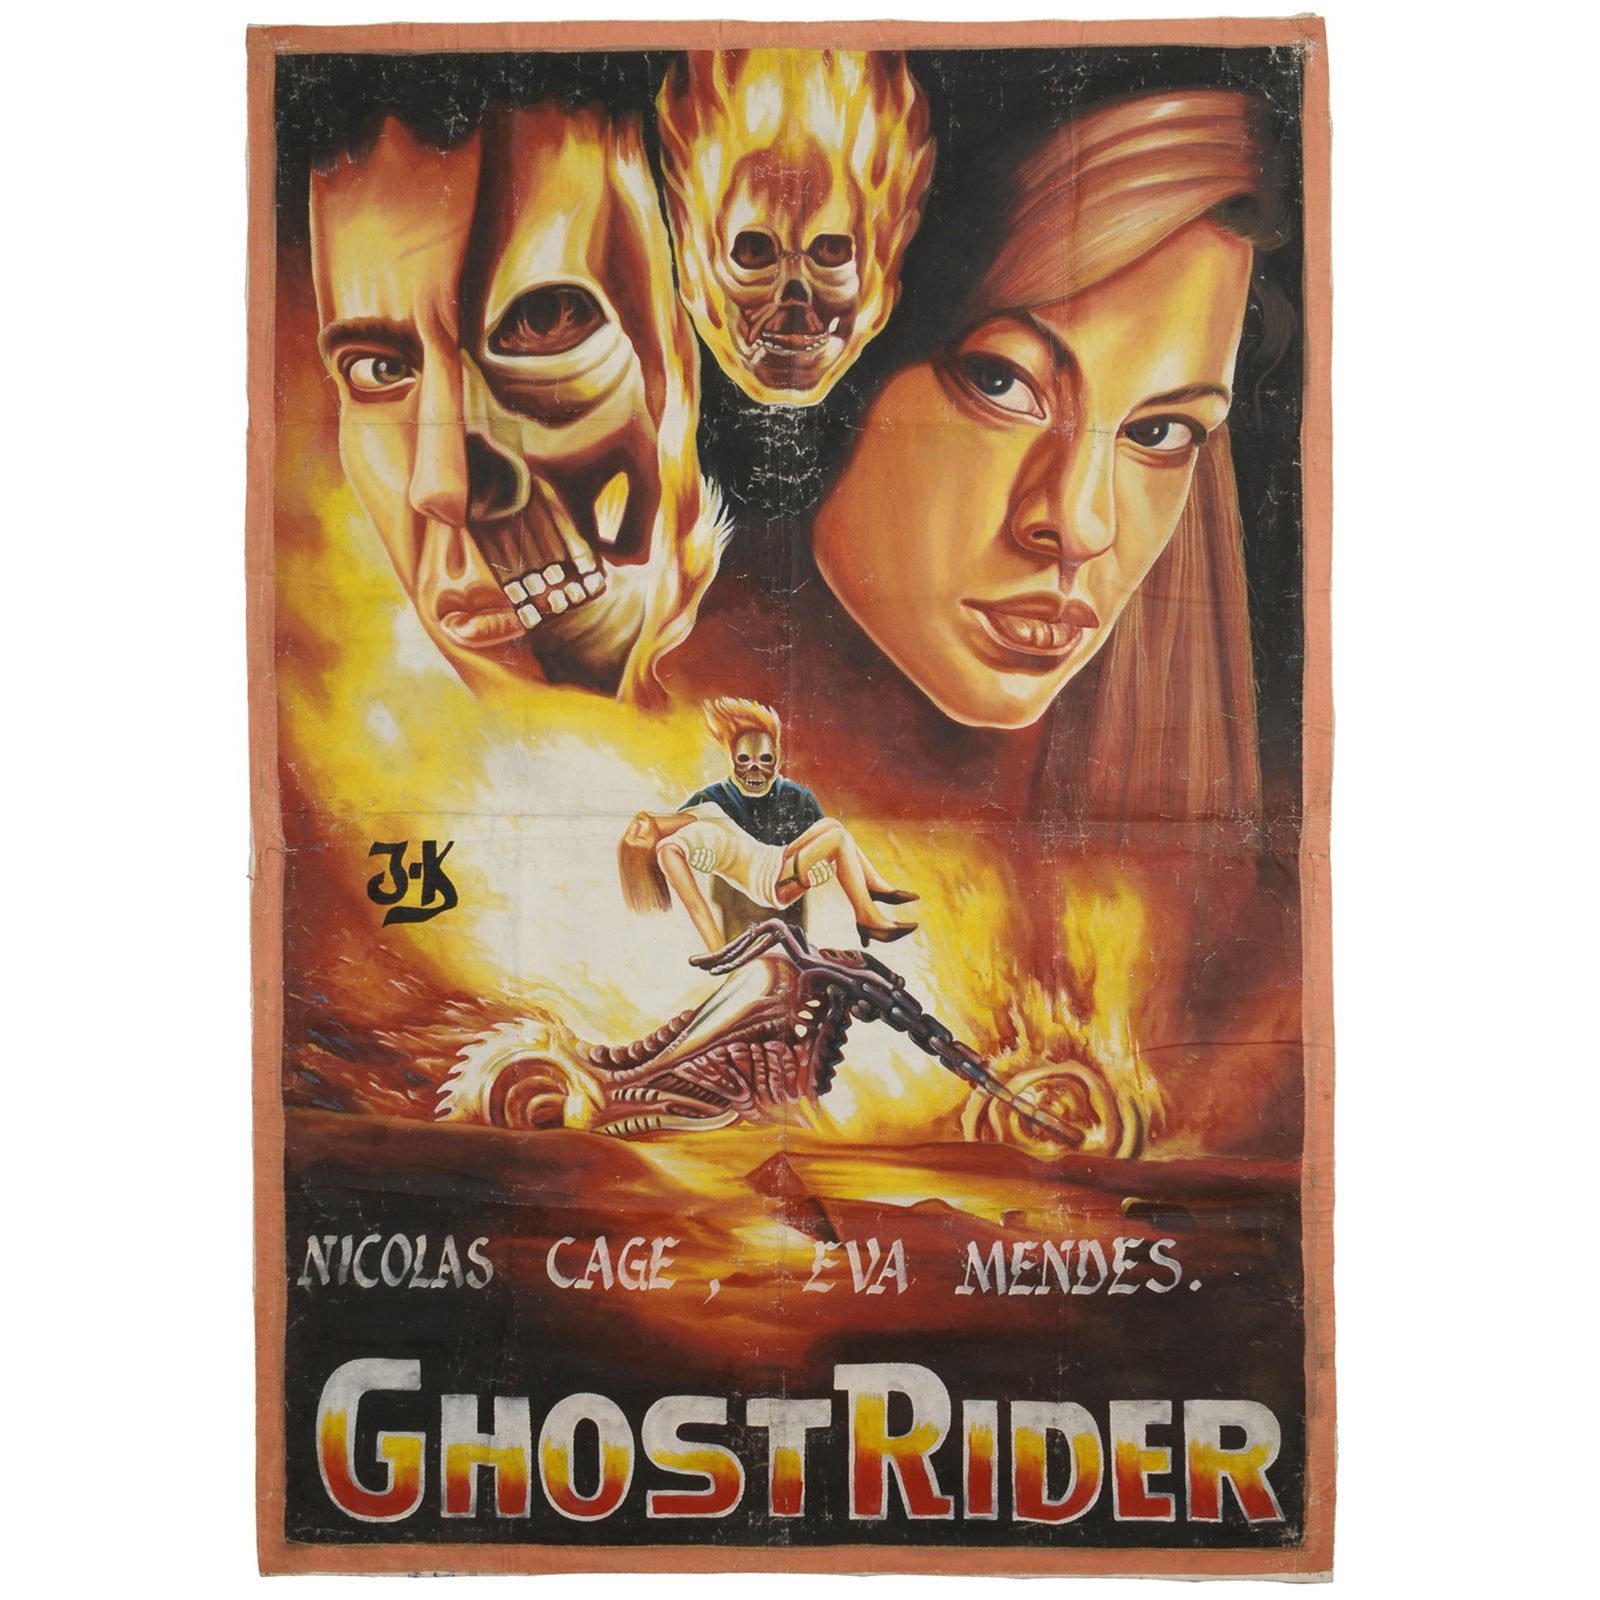 Ghost Rider movie poster hand painted in Ghana for the local cinema actor Nicolas Cage